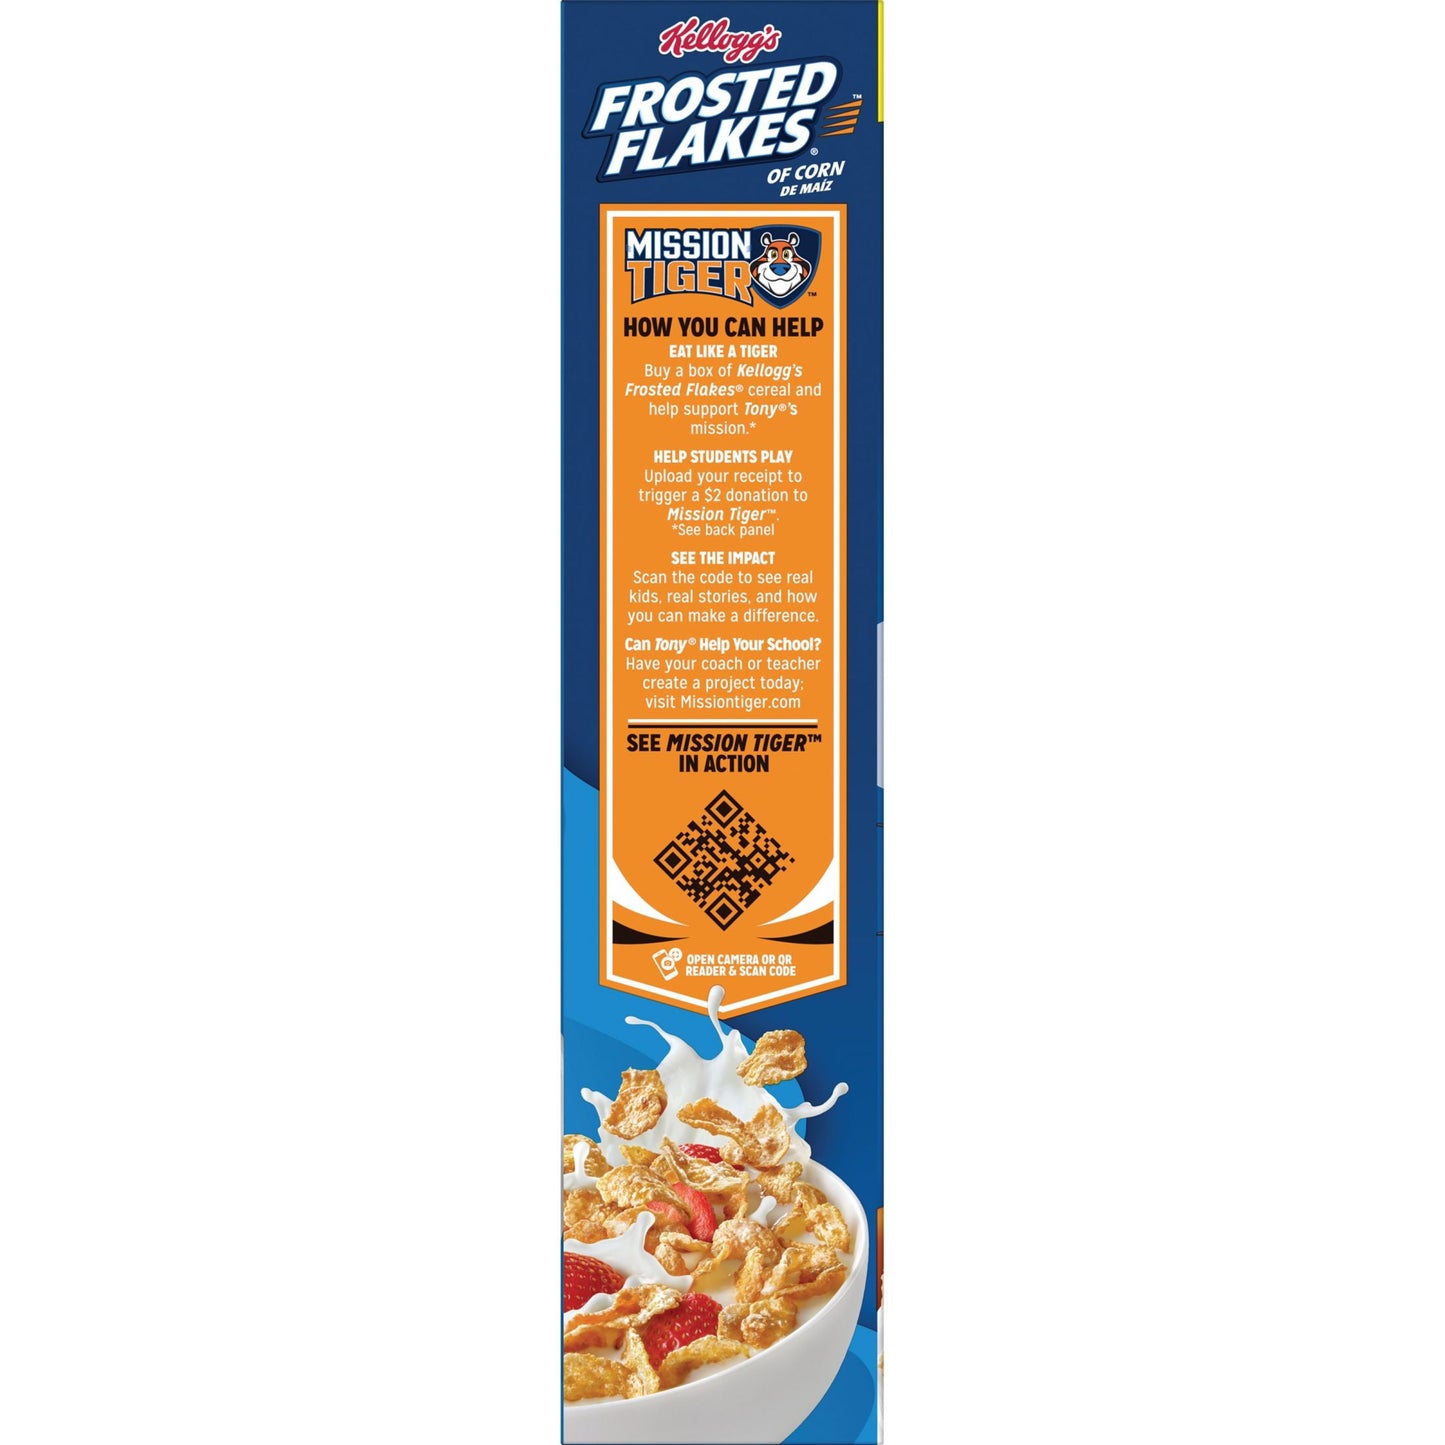 Kellogg's Frosted Flakes Original Breakfast Cereal, Family Size, 21.7 oz Box